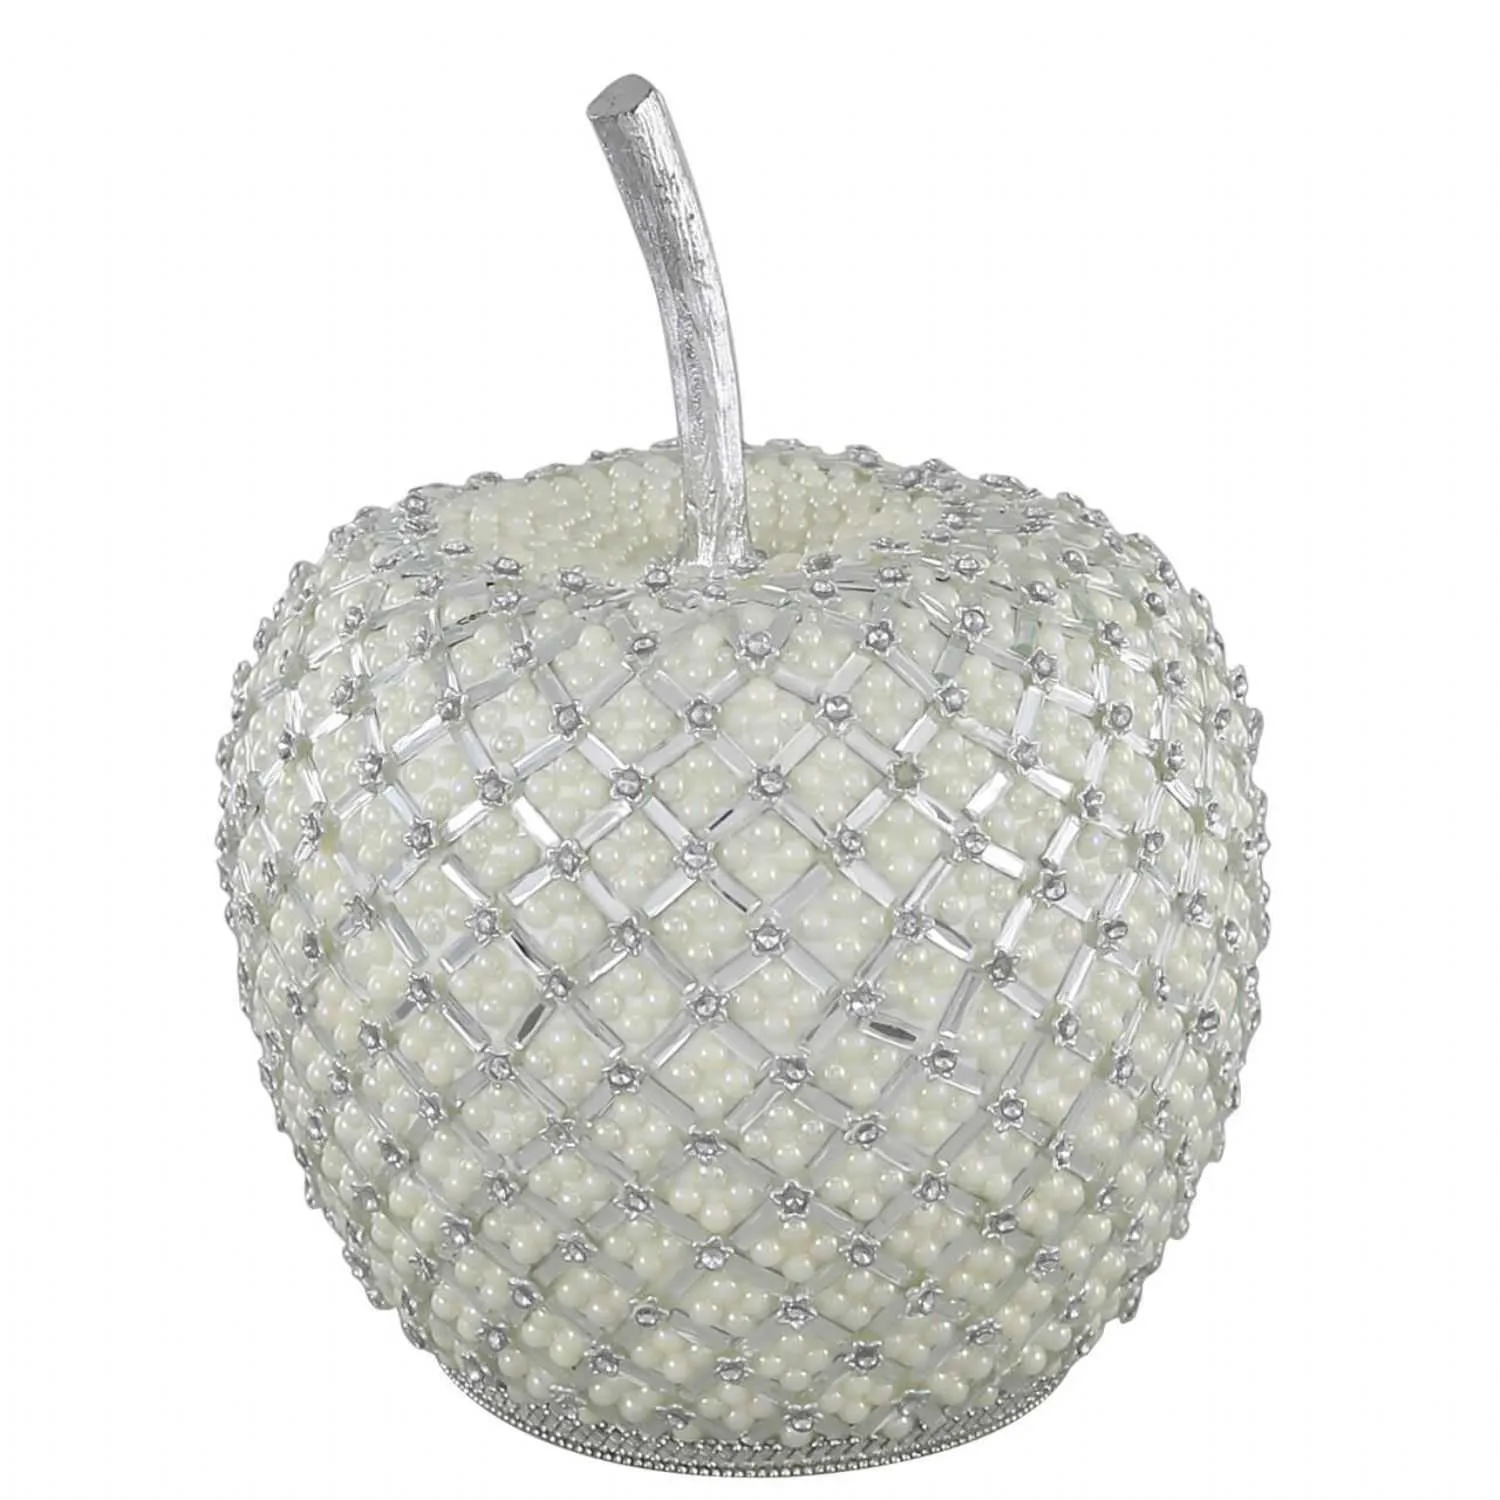 32cm Apple Decoration With Pearl Detail Ivory